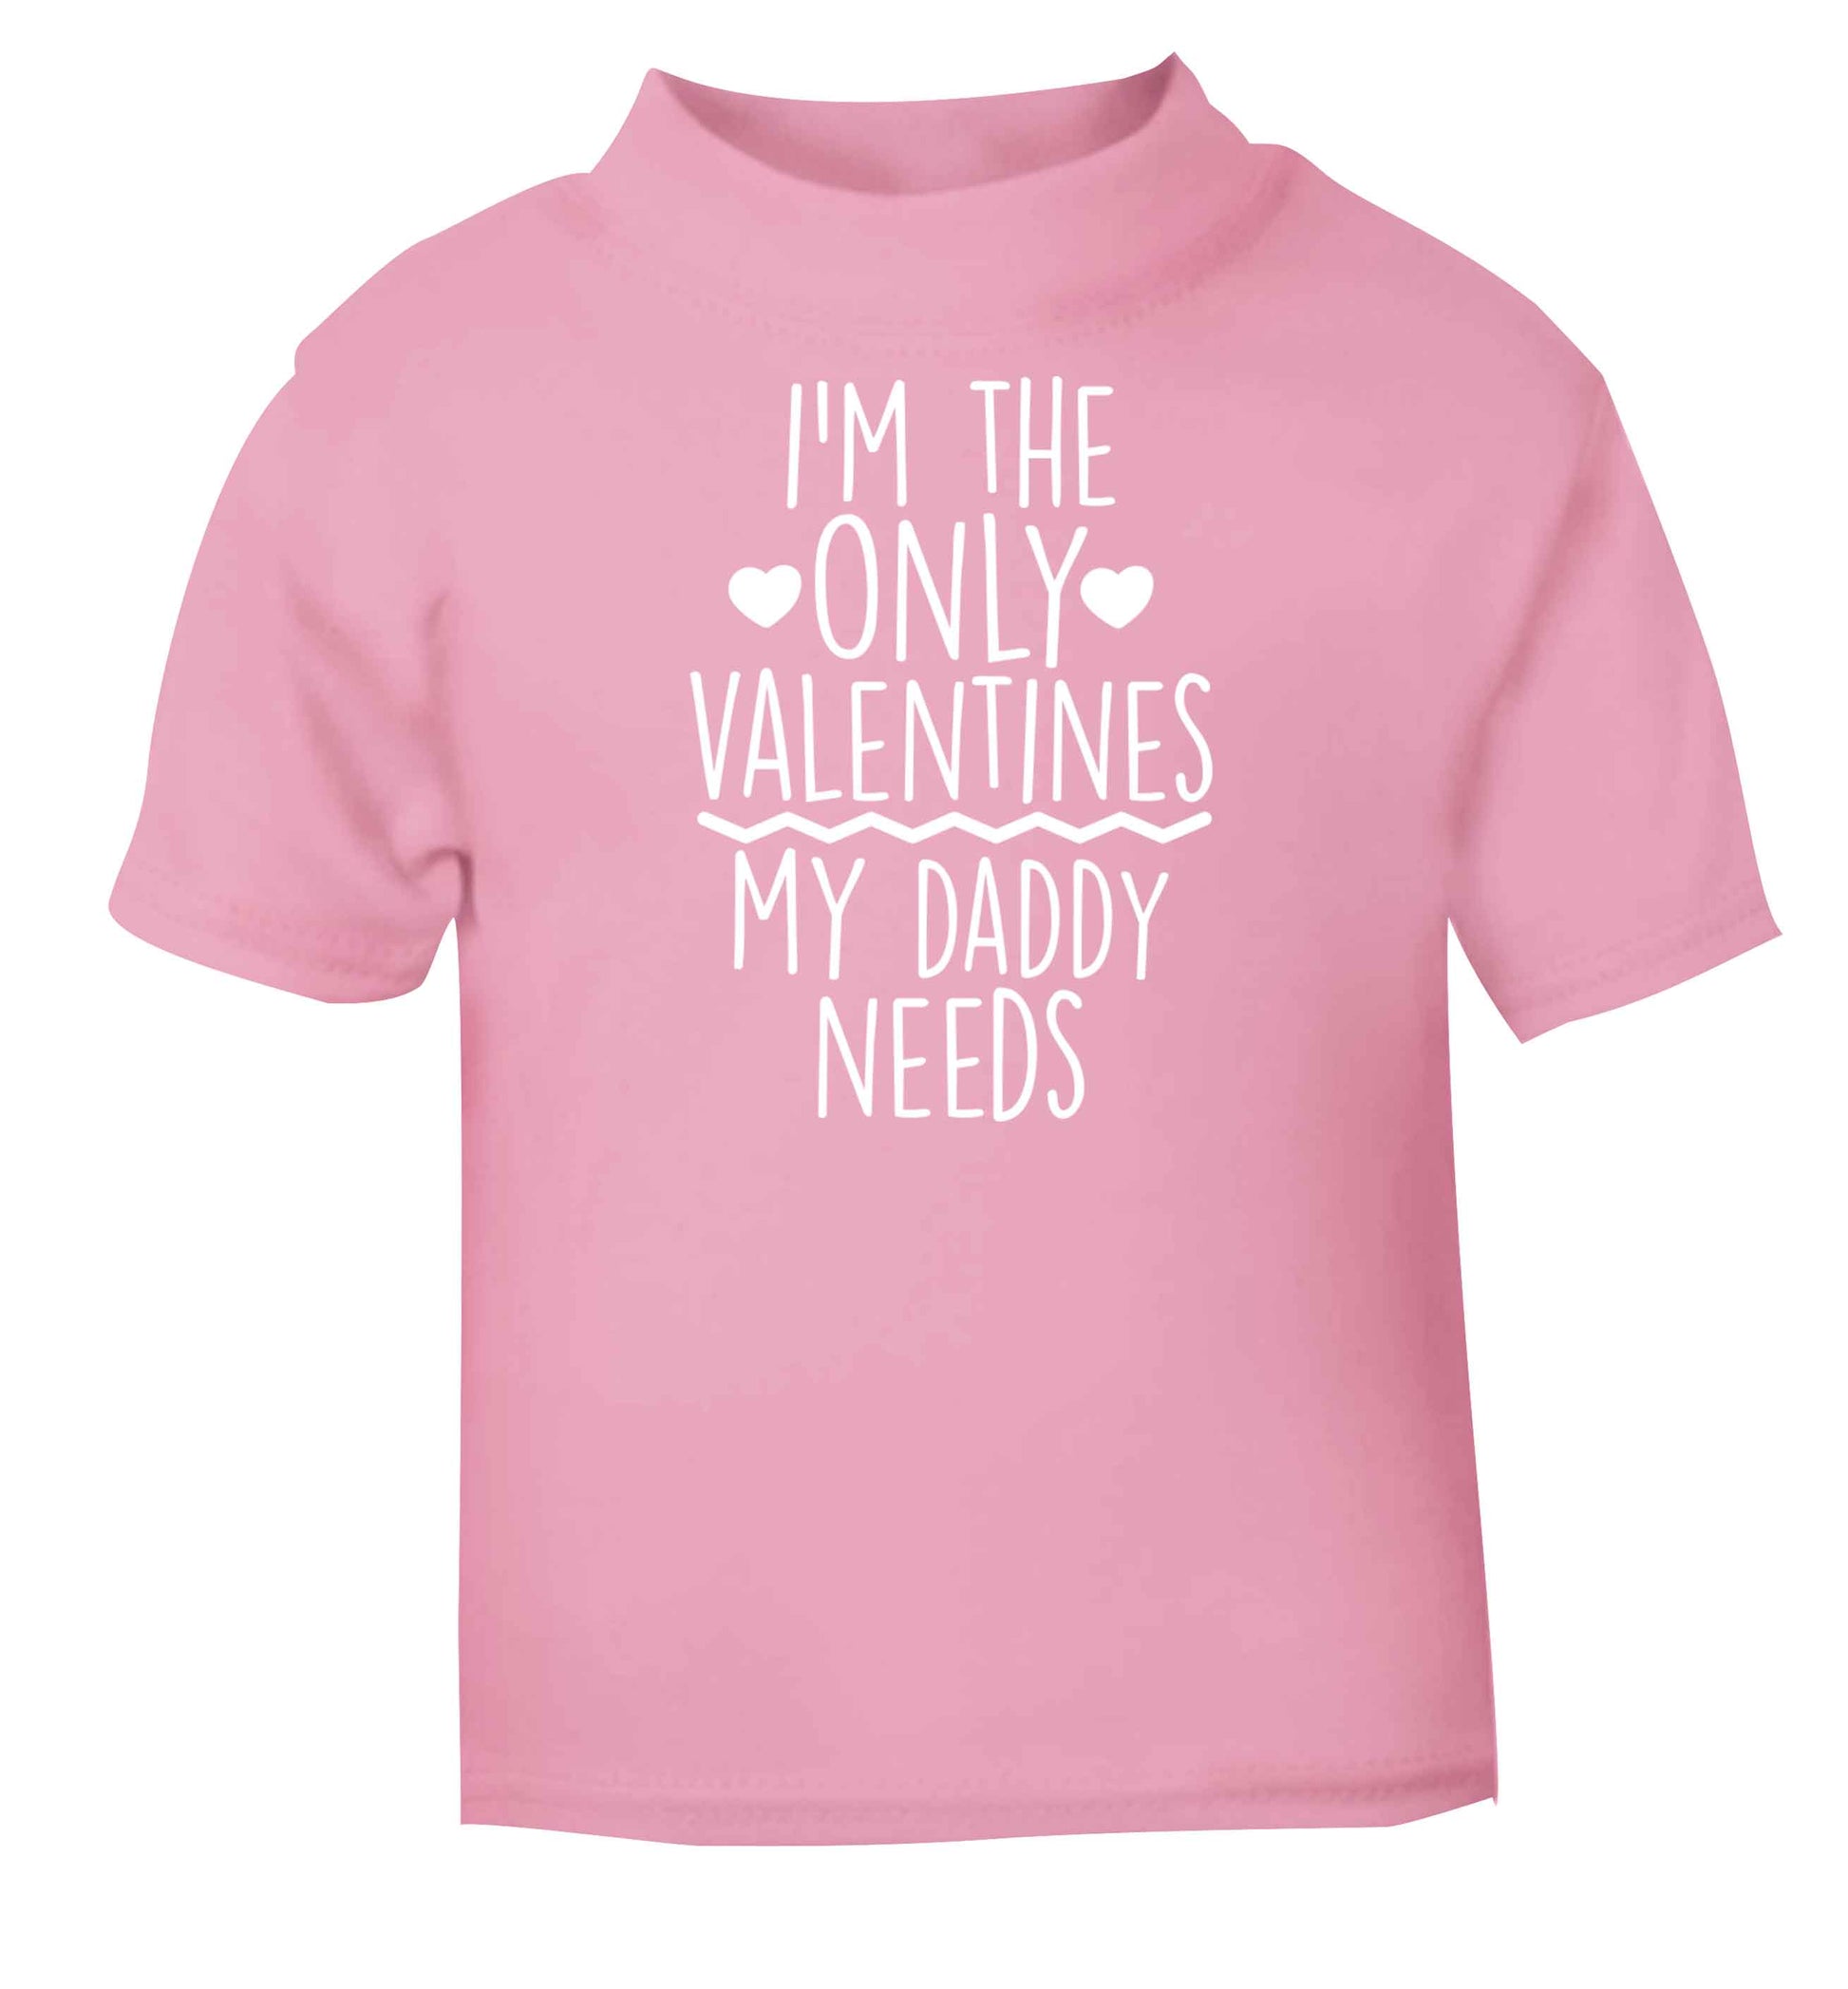 I'm the only valentines my daddy needs light pink baby toddler Tshirt 2 Years